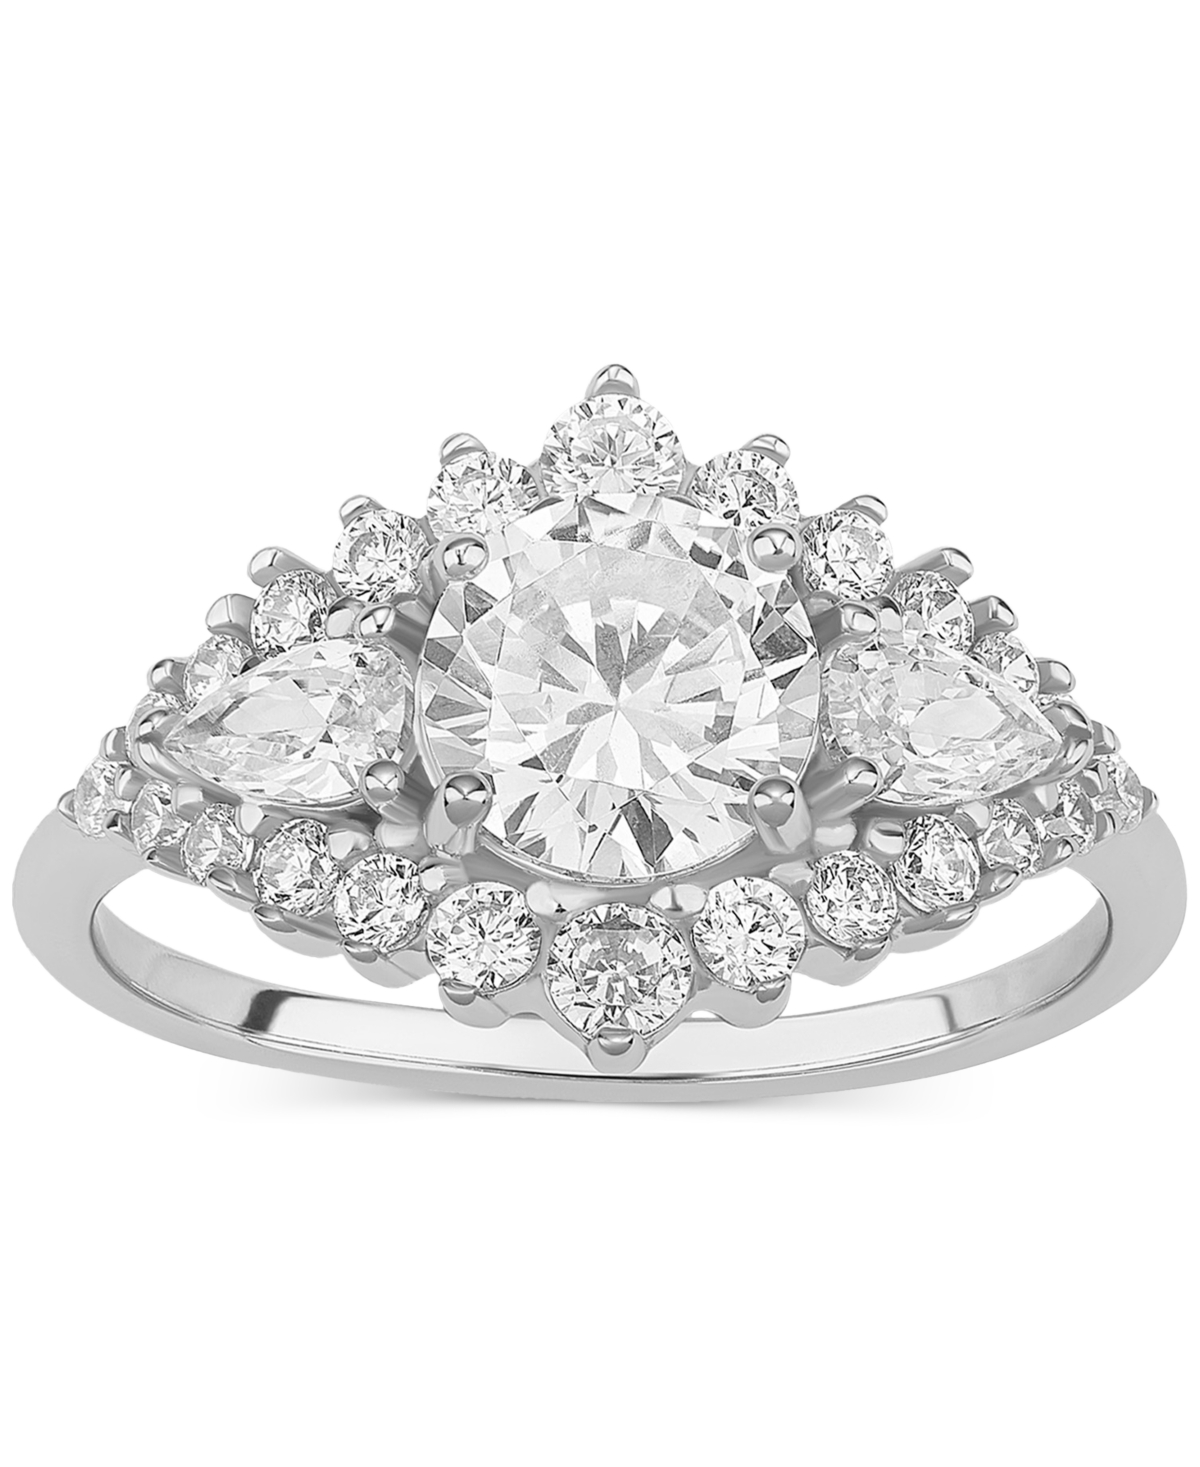 Cubic Zirconia Halo Cluster Ring in Sterling Silver, Created for Macy's - Sterling Silver